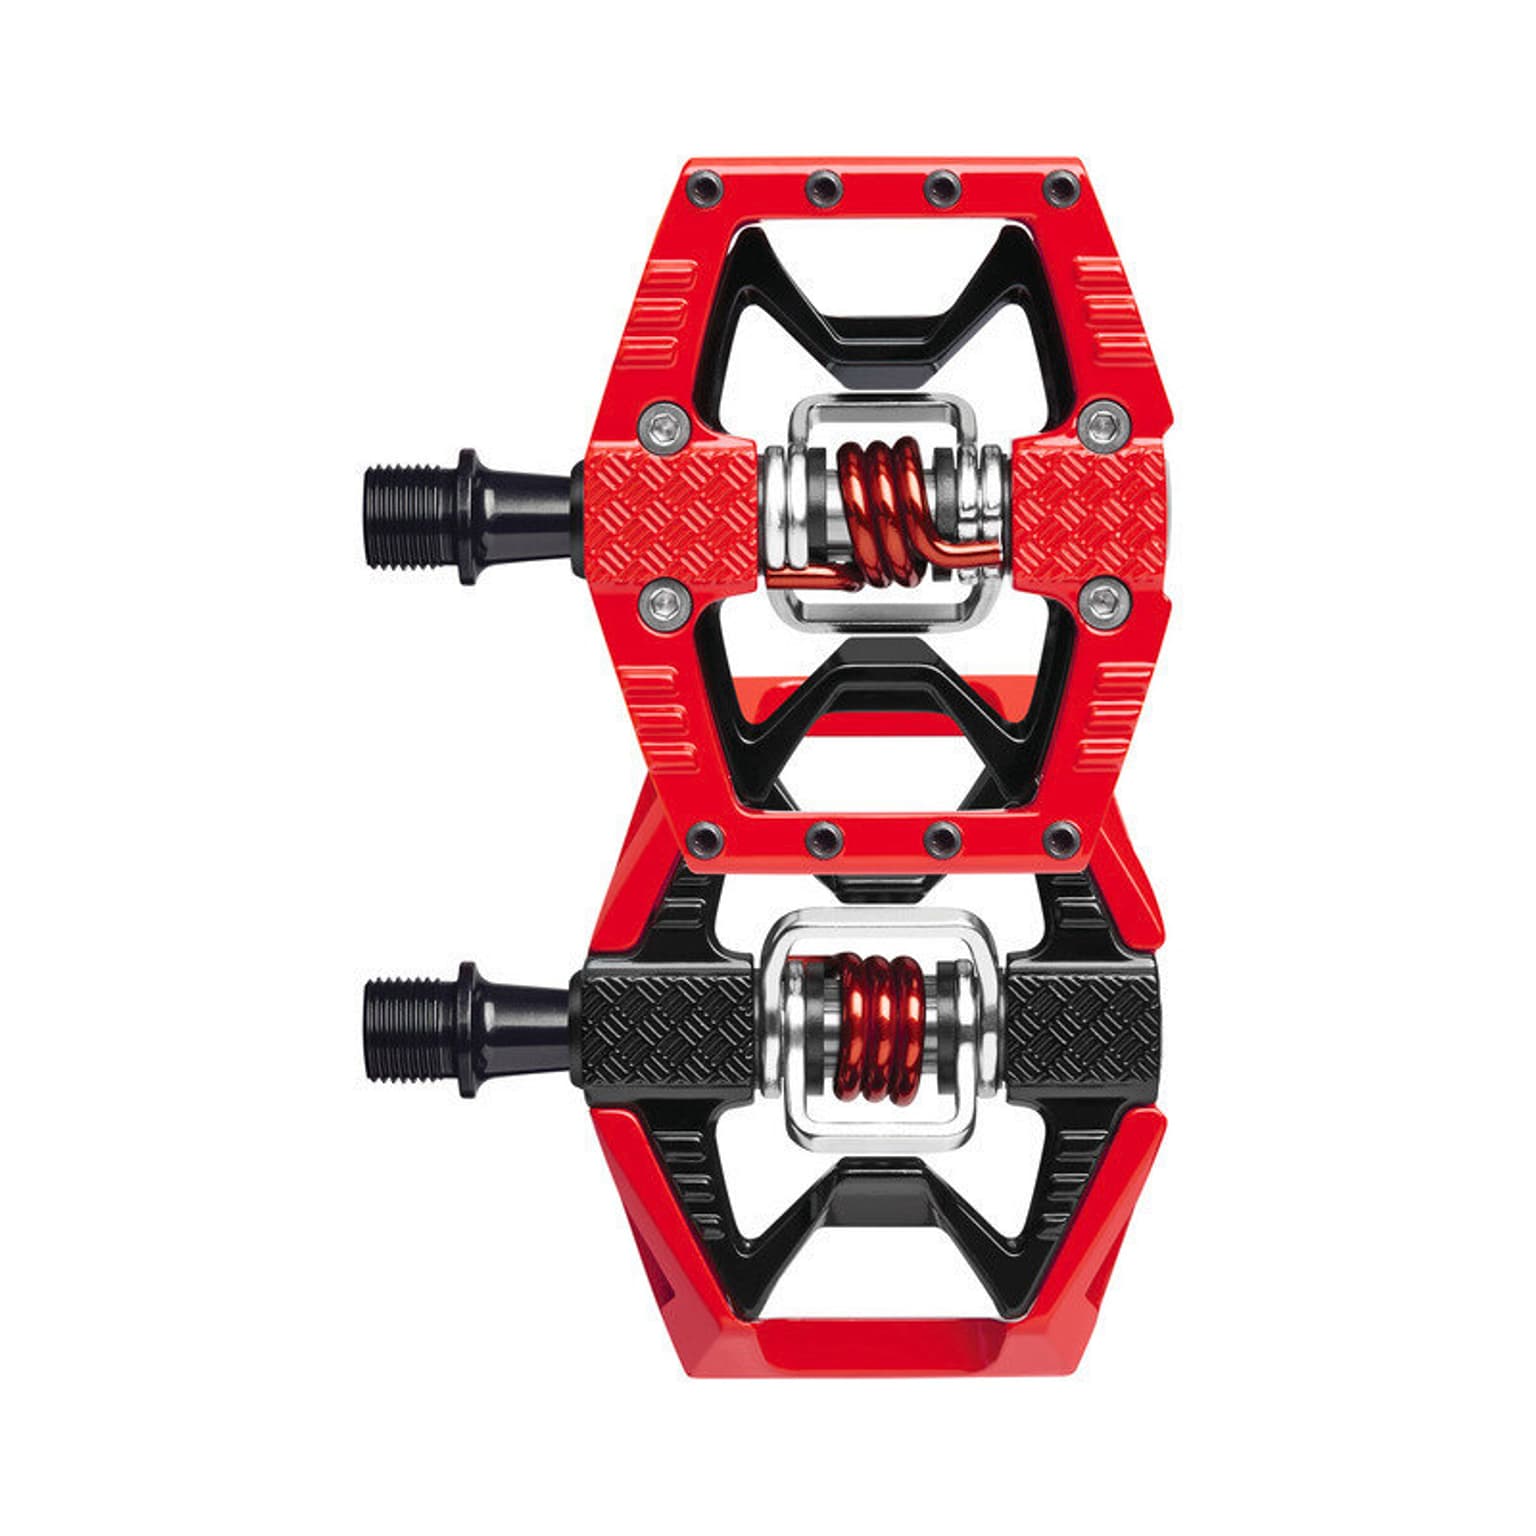 crankbrothers crankbrothers Pedal Double Shot 3 mit Pins Pedale 2